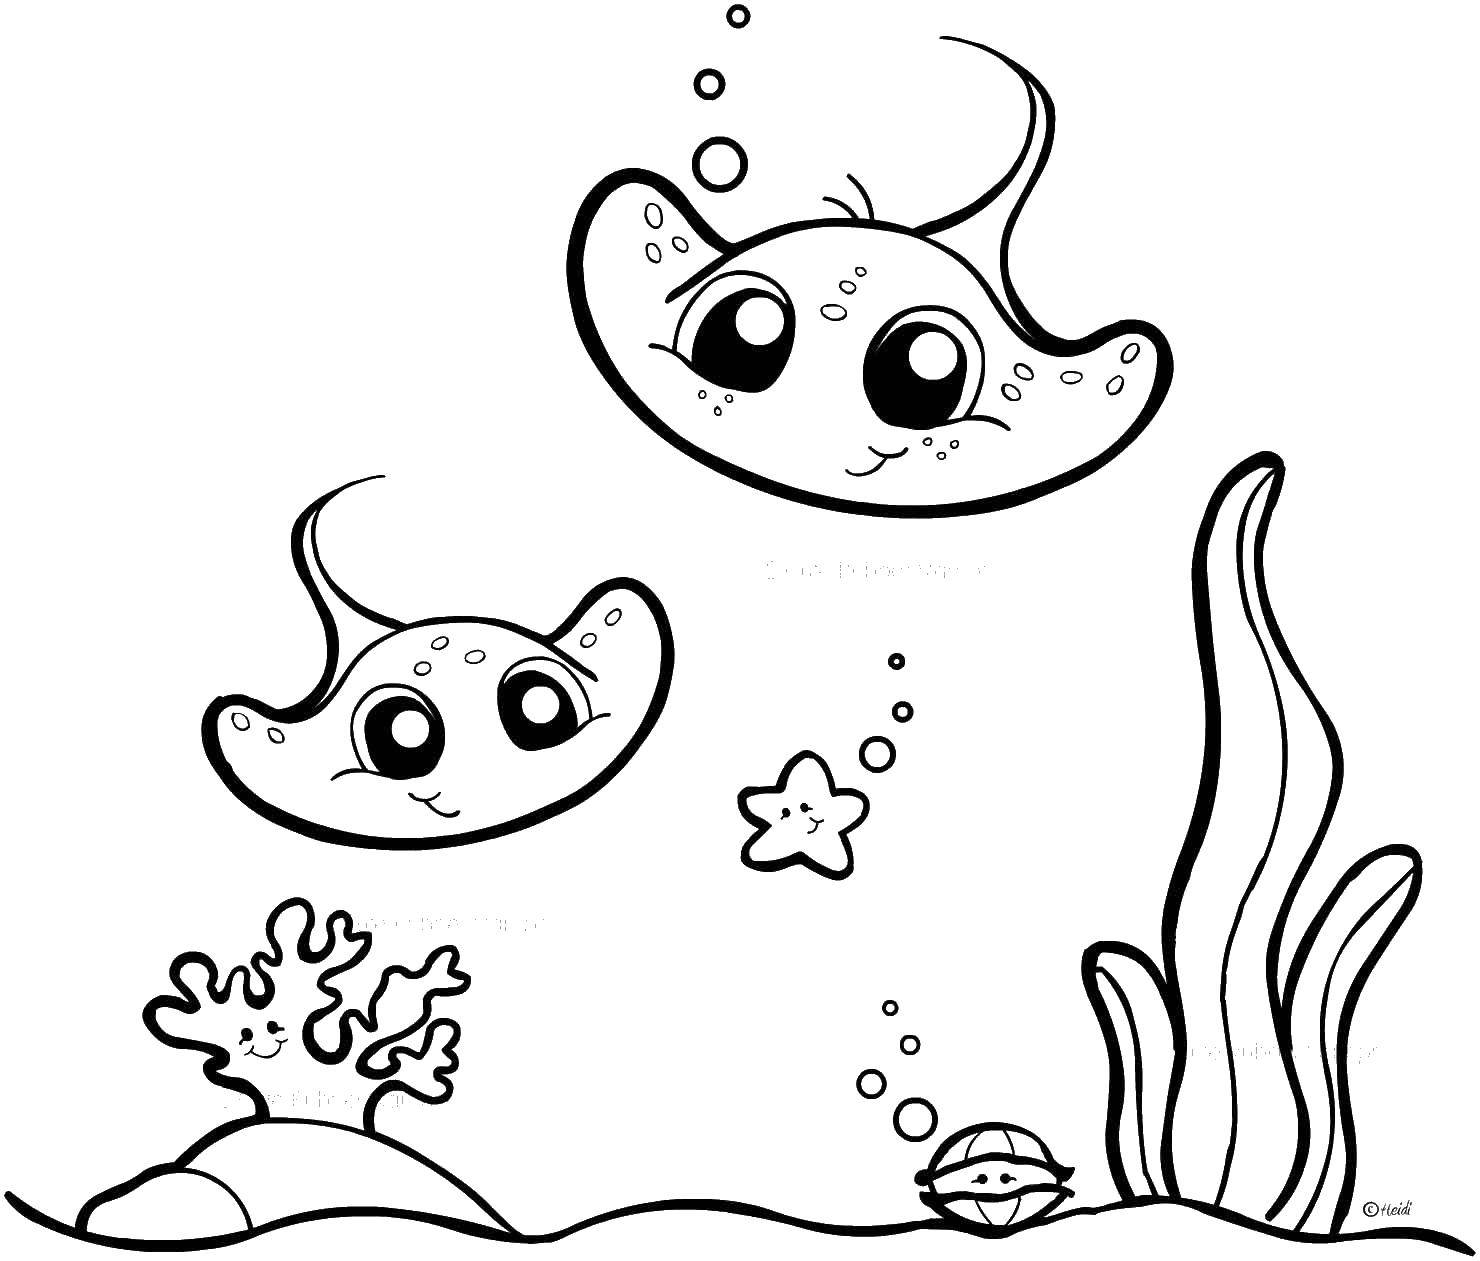 Coloring Two small Stingray and seaweed. Category marine animals. Tags:  Stingray, seaweed, bubbles.